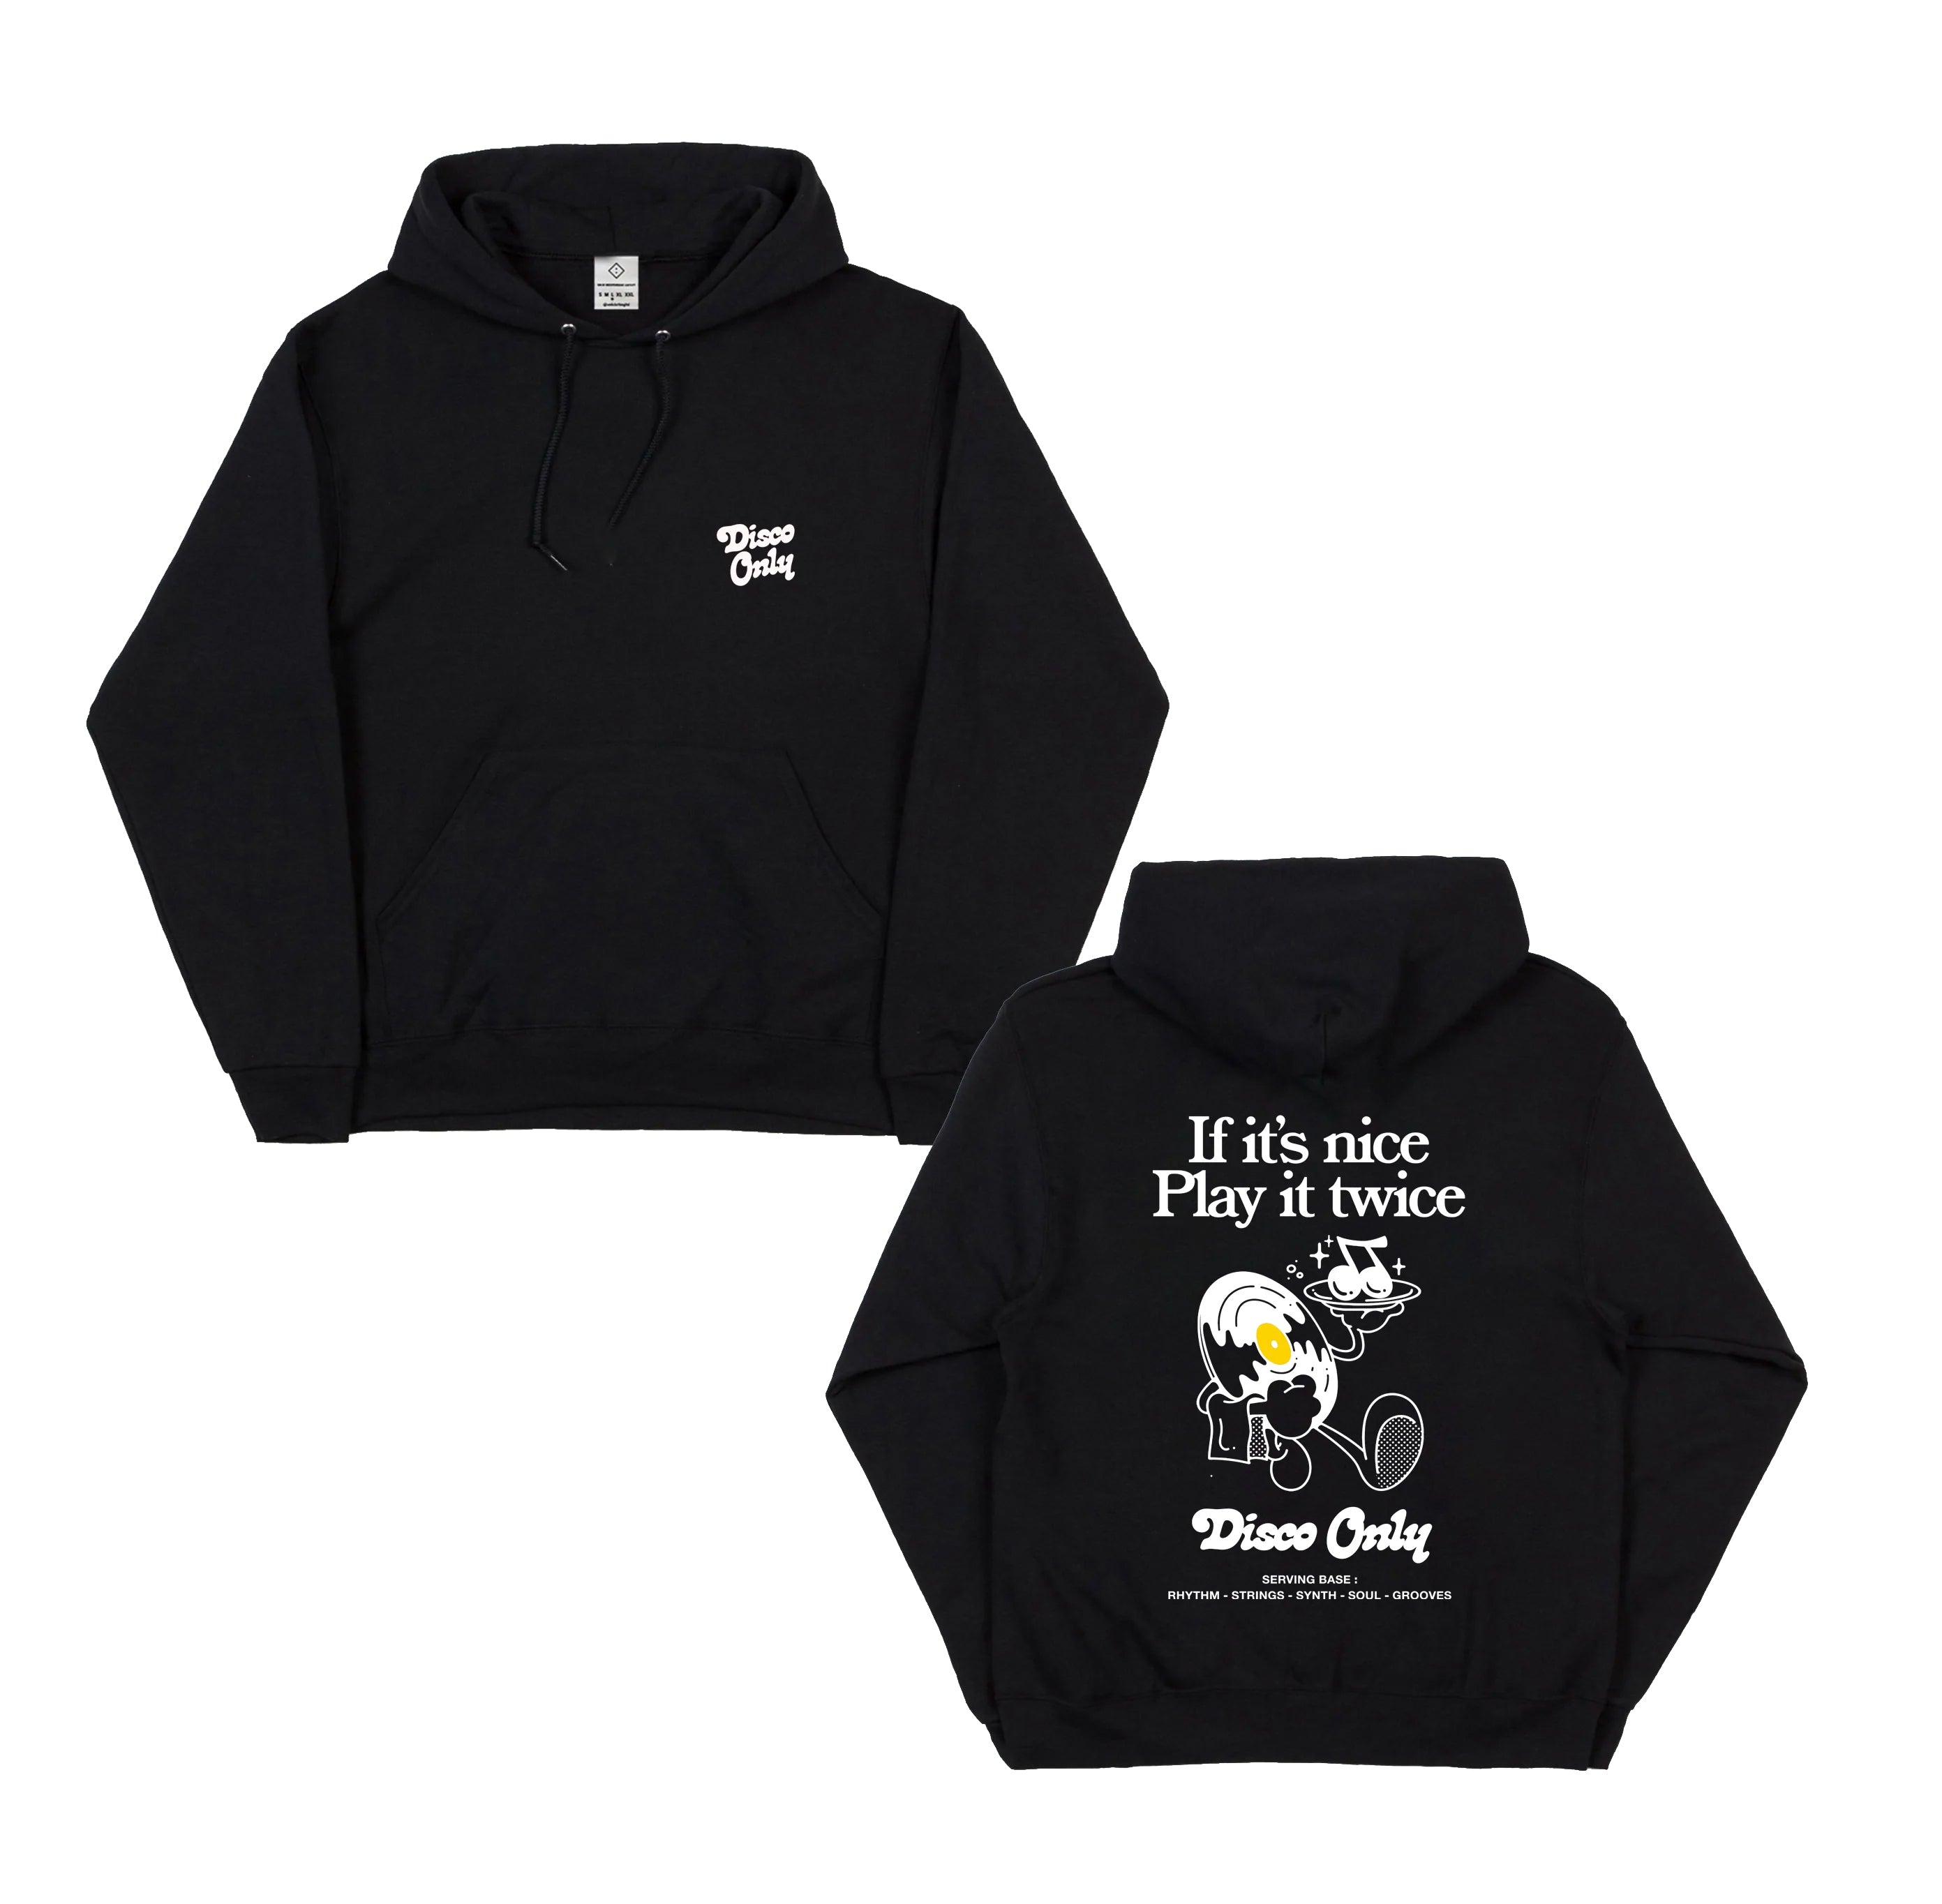 Image of DISCO ONLY 'Play It Twice V2' Hoodie - Black BT Ve Play 1t twice 3 W .o 